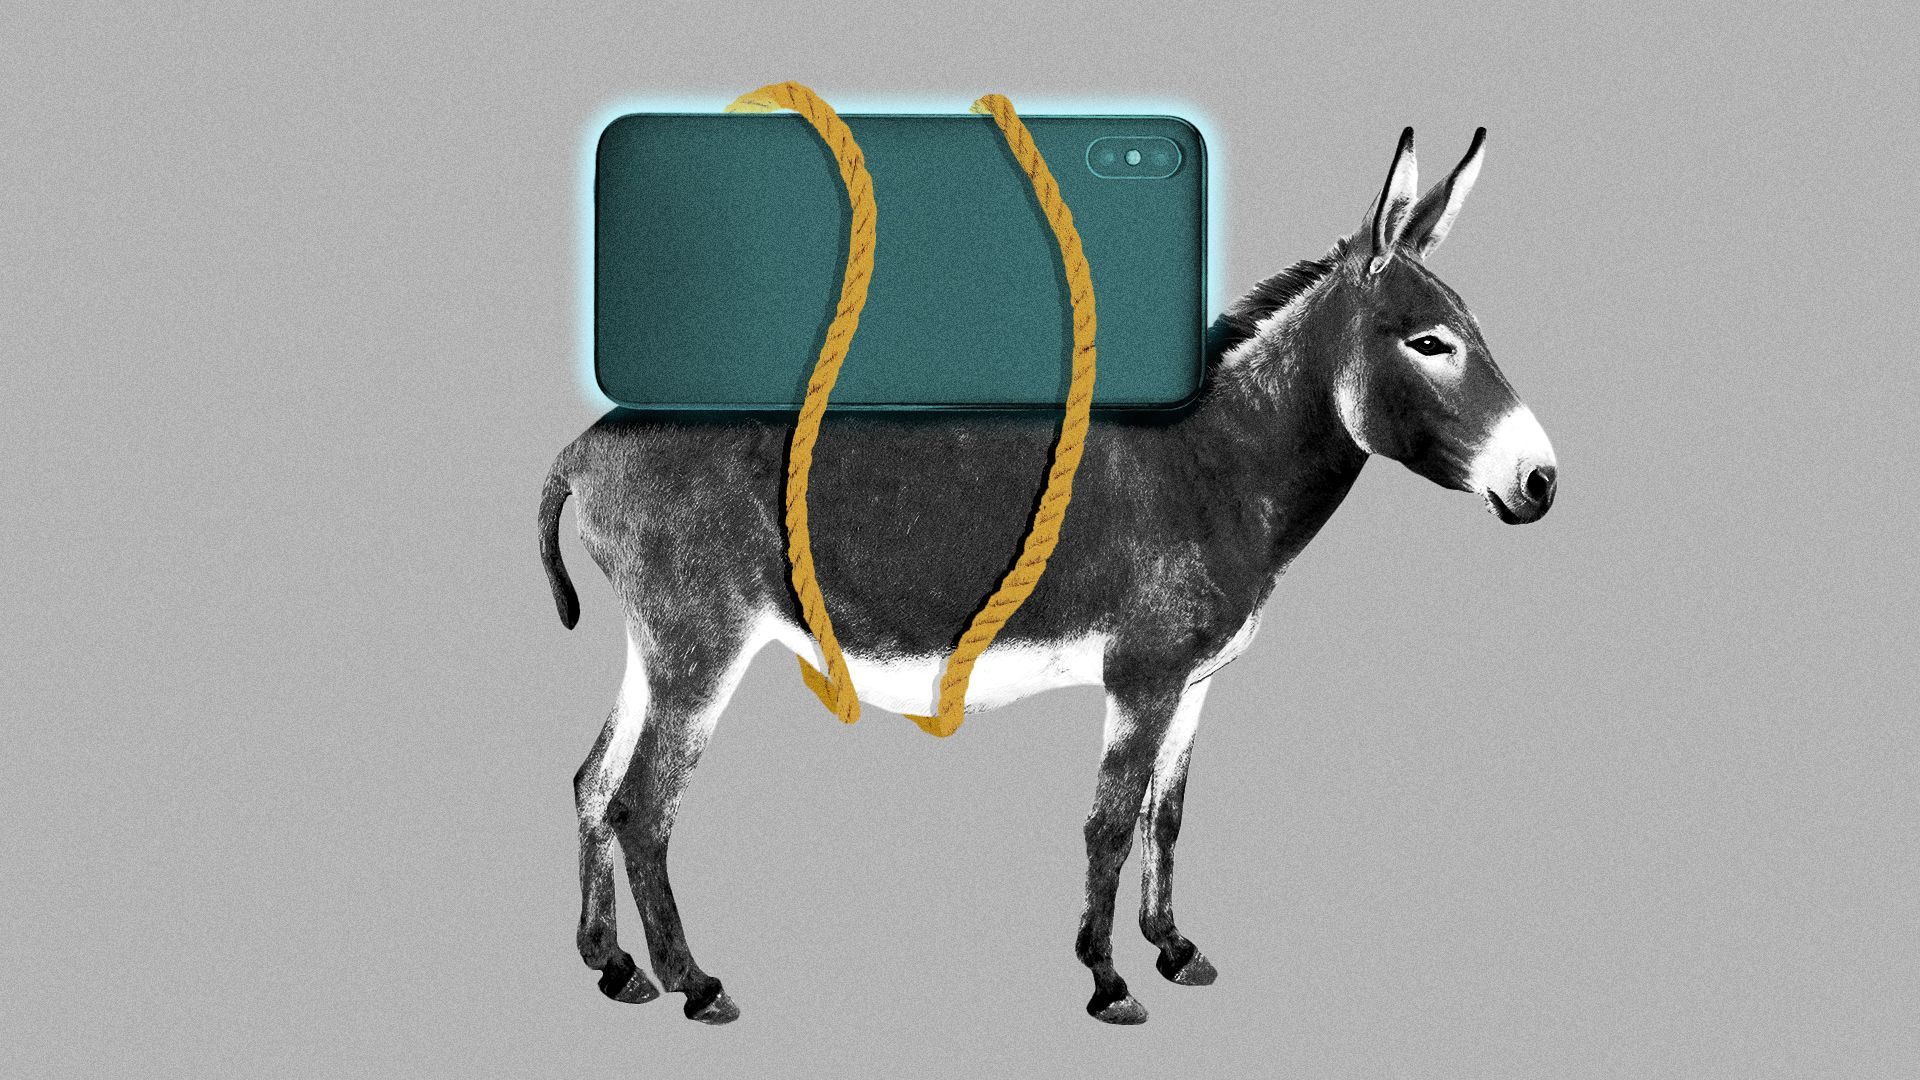 Illustration of a donkey with a smart phone strapped to its back.